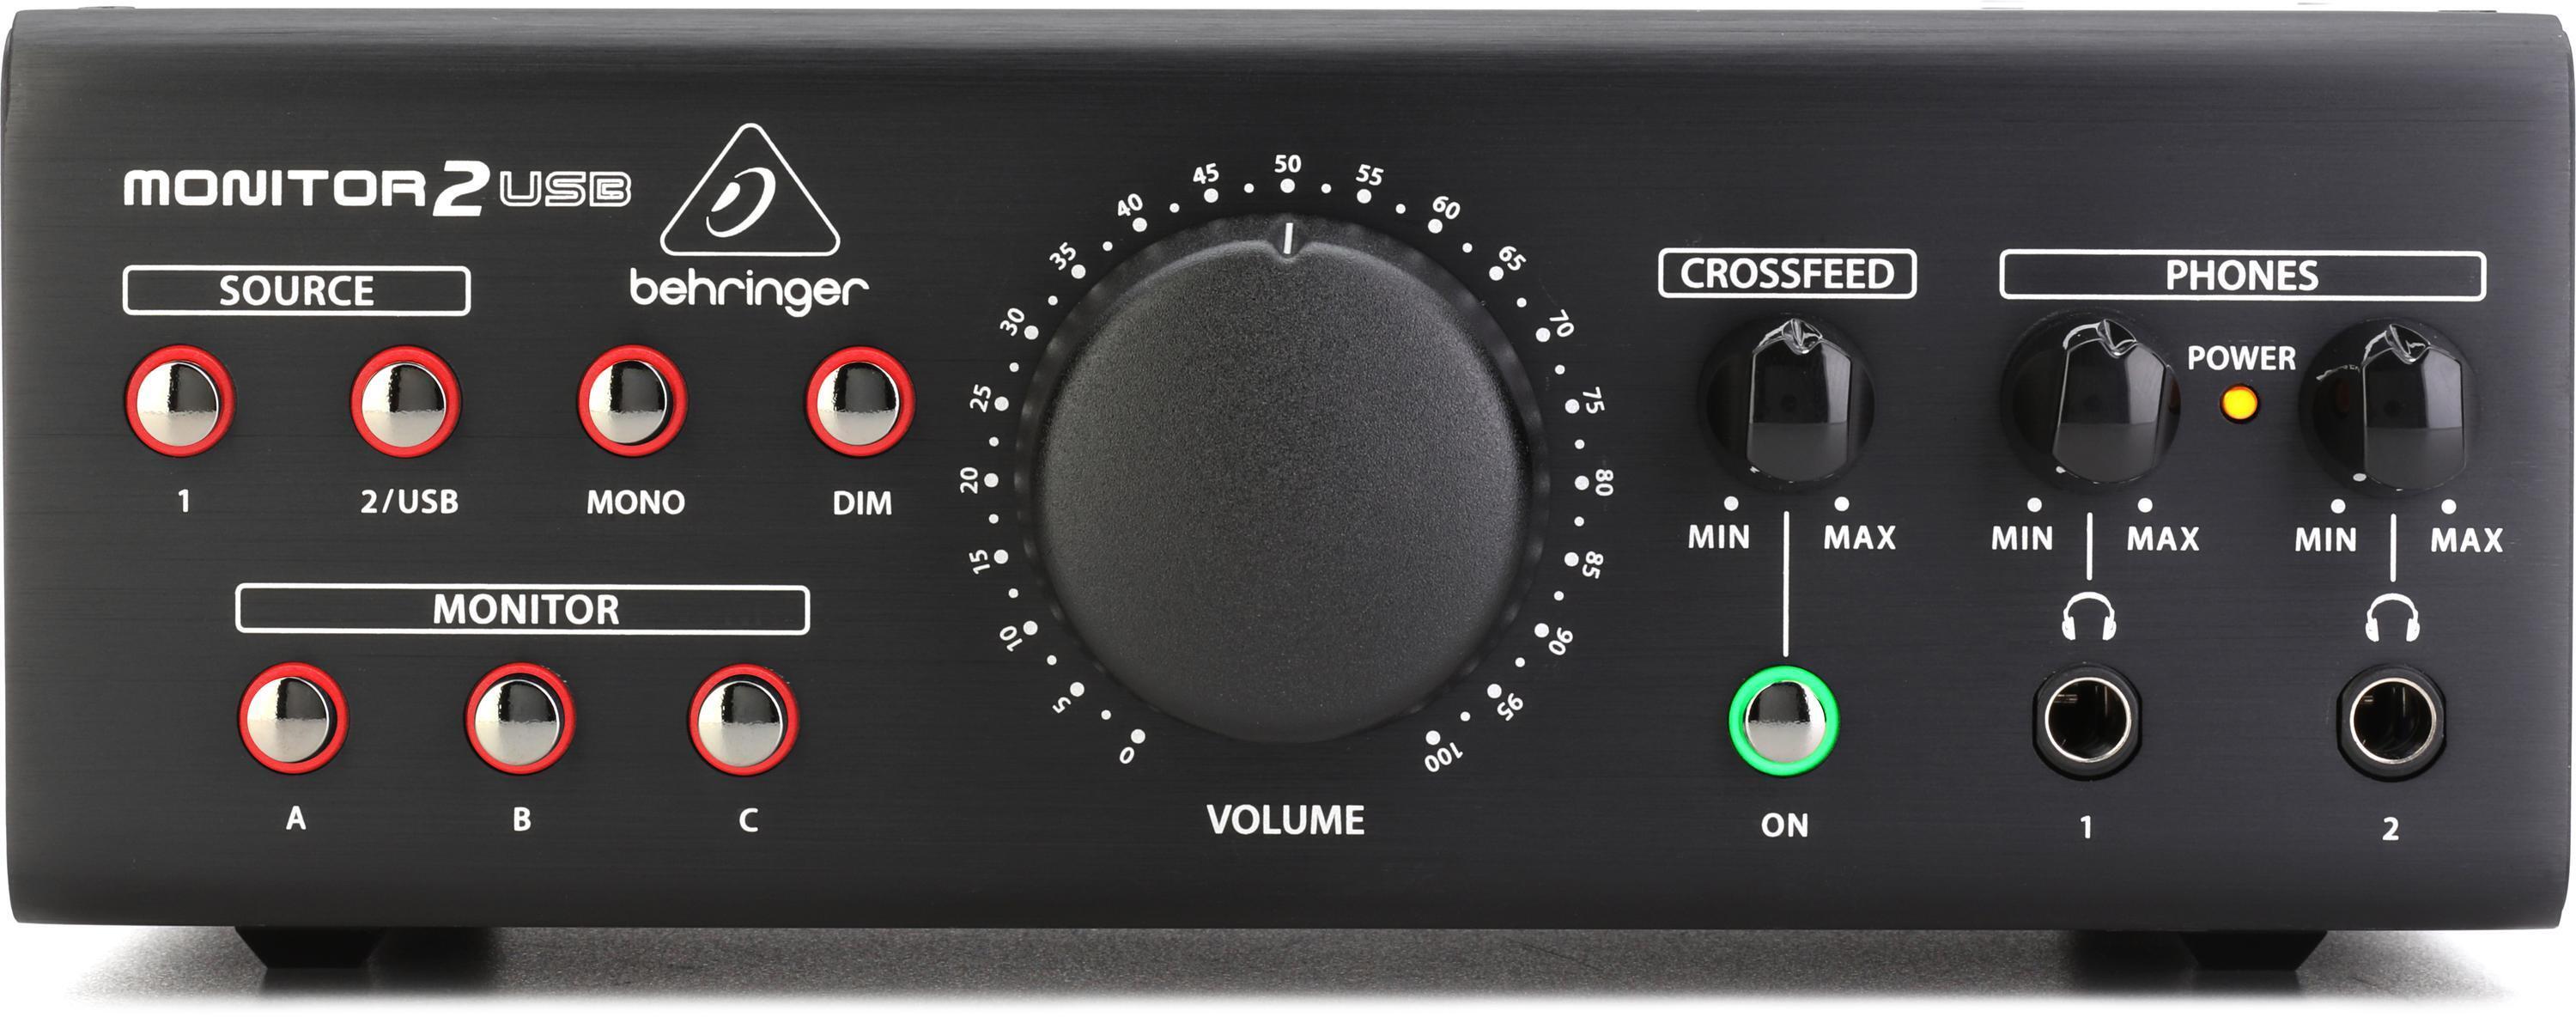 Behringer MONITOR2USB Monitor Controller | Sweetwater